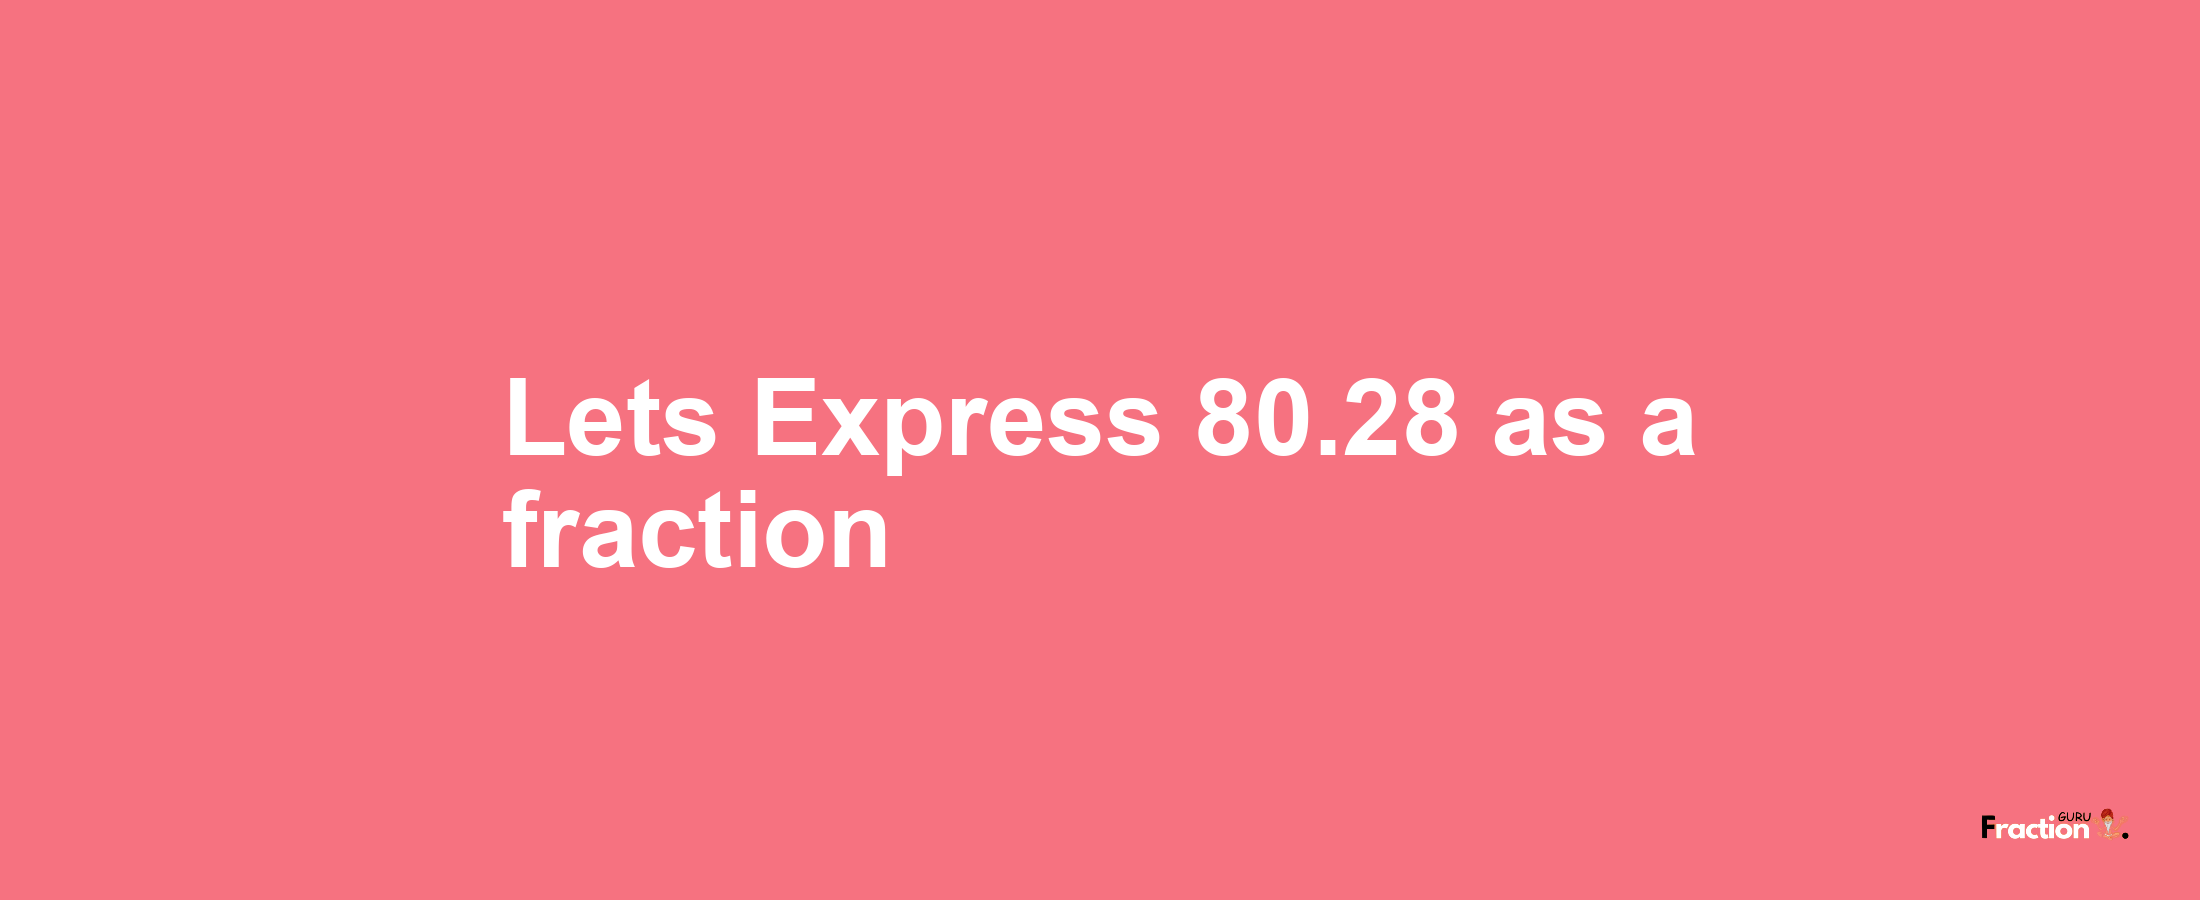 Lets Express 80.28 as afraction